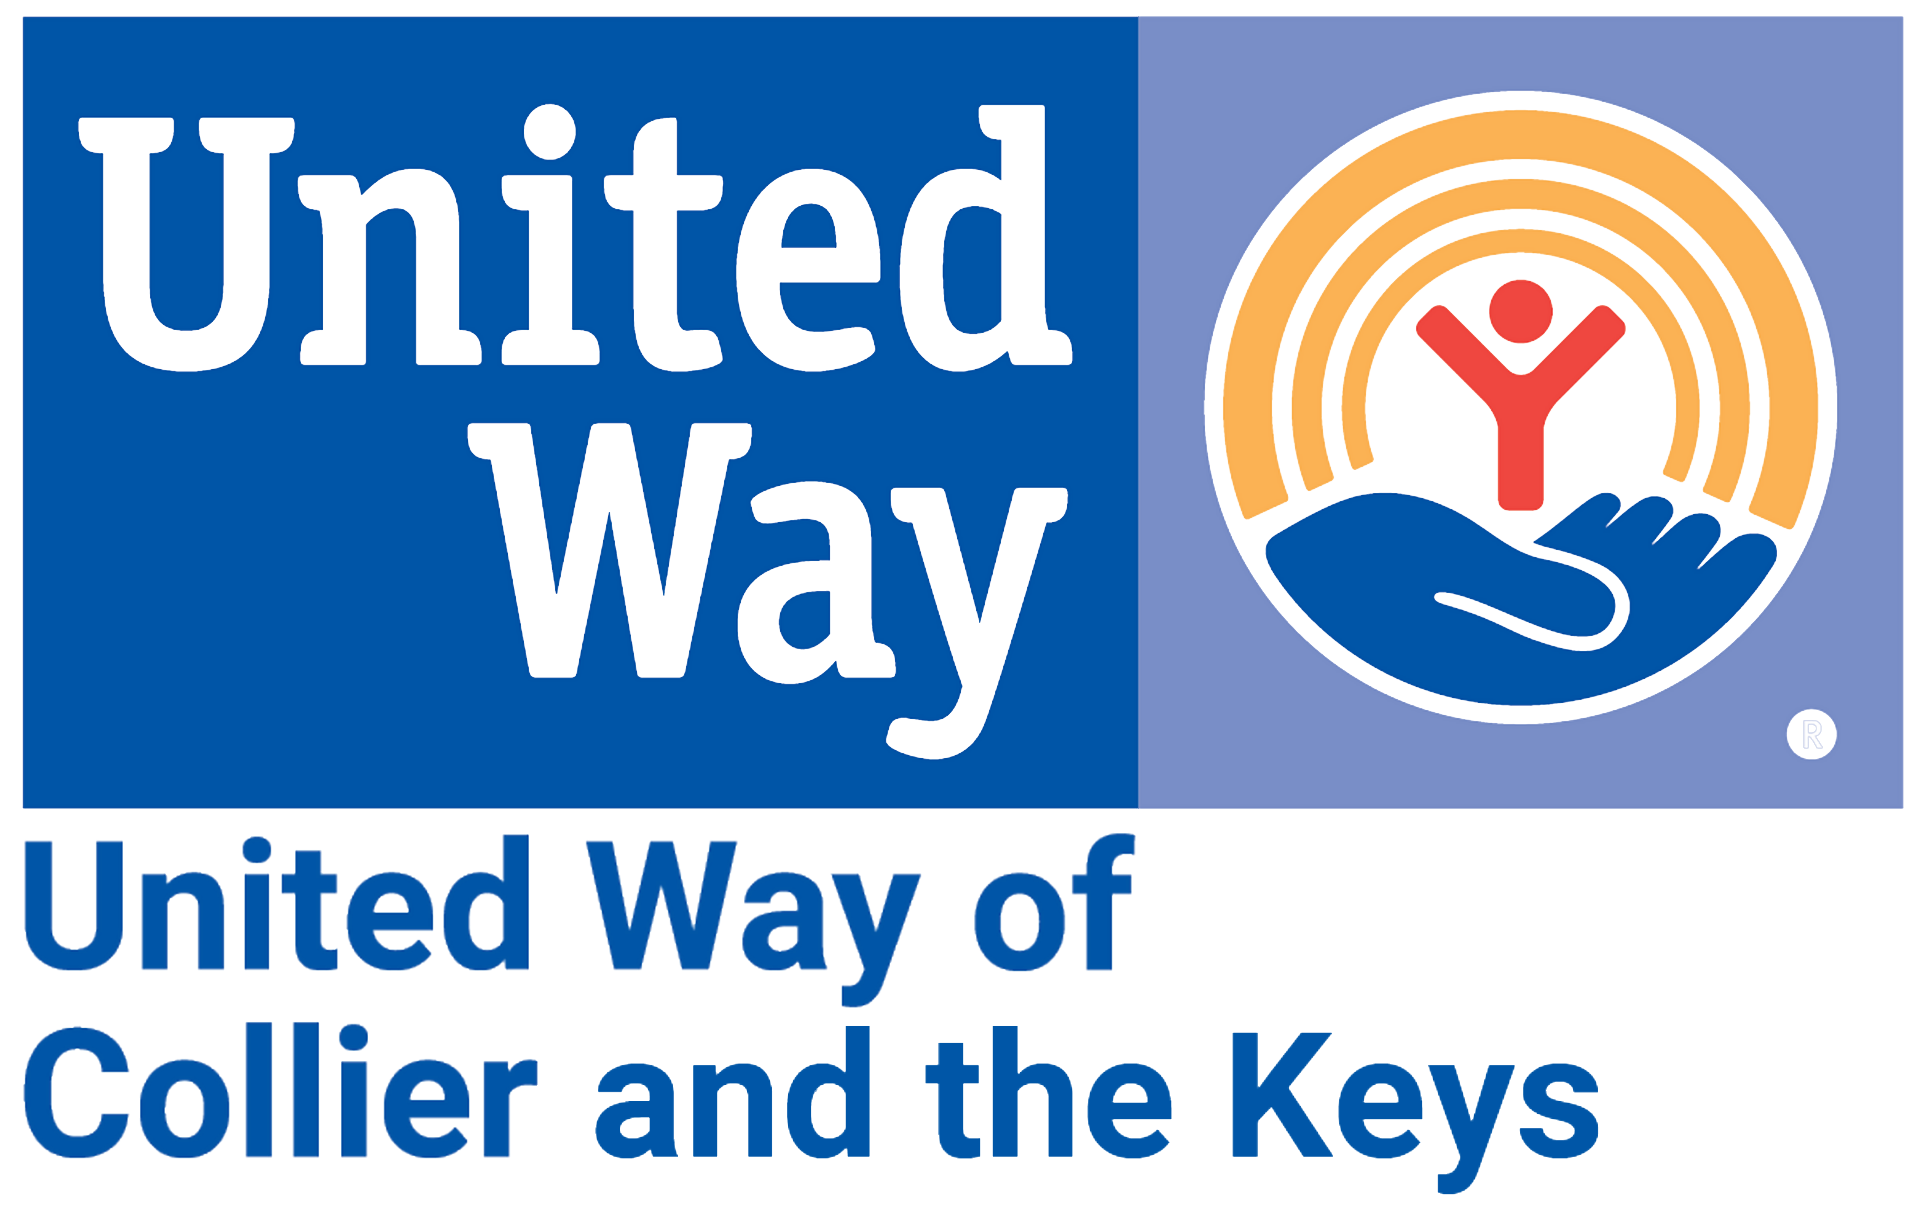 United Way of Collier County and the Keys